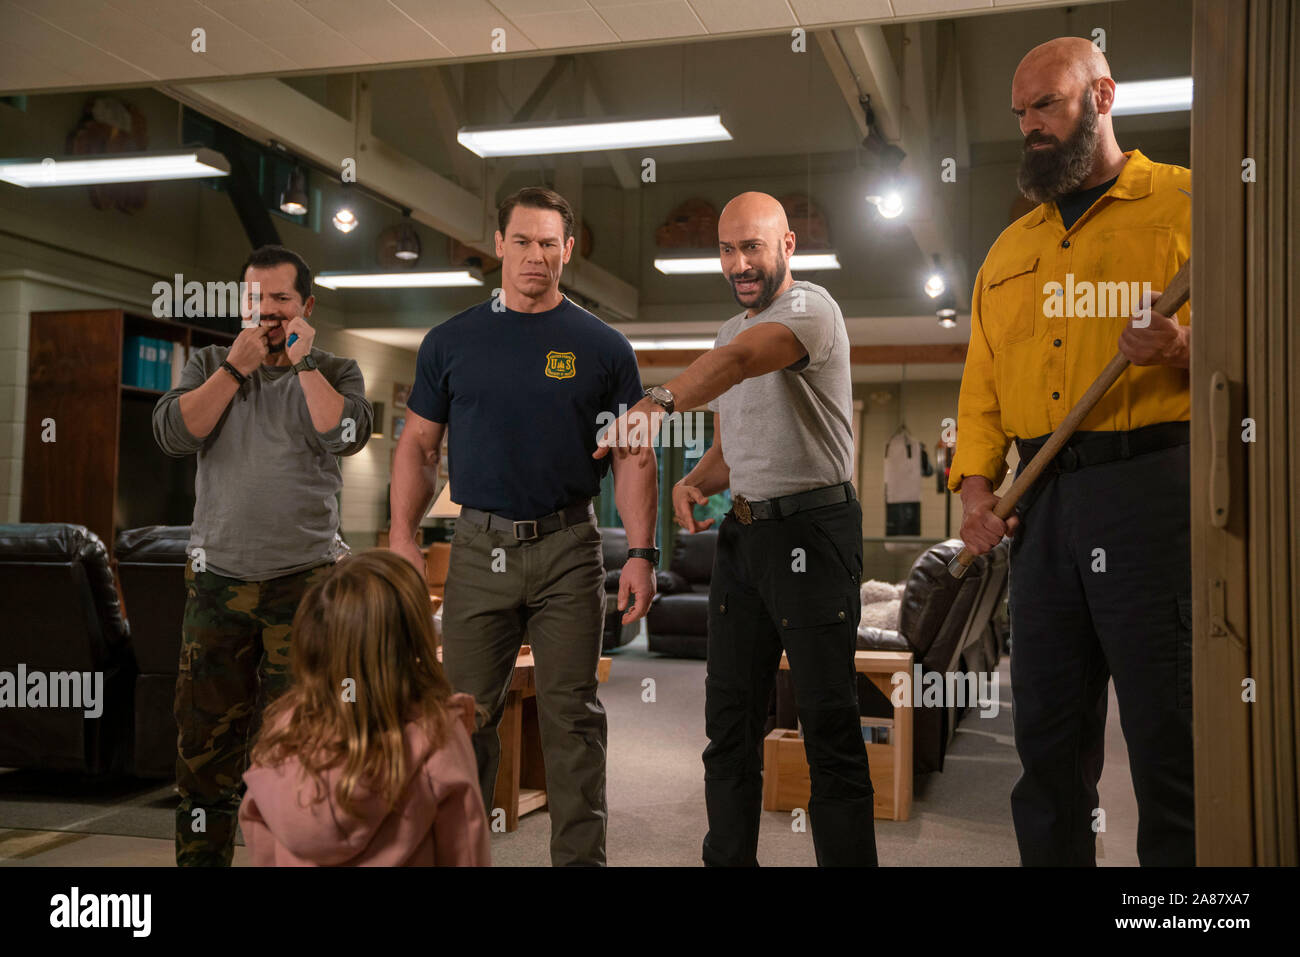 RELEASE DATE: November 8, 2019 TITLE: Playing With Fire STUDIO: Paramount Pictures DIRECTOR: Andy Fickman PLOT: A crew of rugged firefighters meet their match when attempting to rescue three rambunctious kids. STARRING: John Leguizamo, Finley Rose Slater (back to camera), John Cena, Keegan-Michael Key, and Tyler Mane. (Credit Image: © Paramount Pictures/Entertainment Pictures) Stock Photo